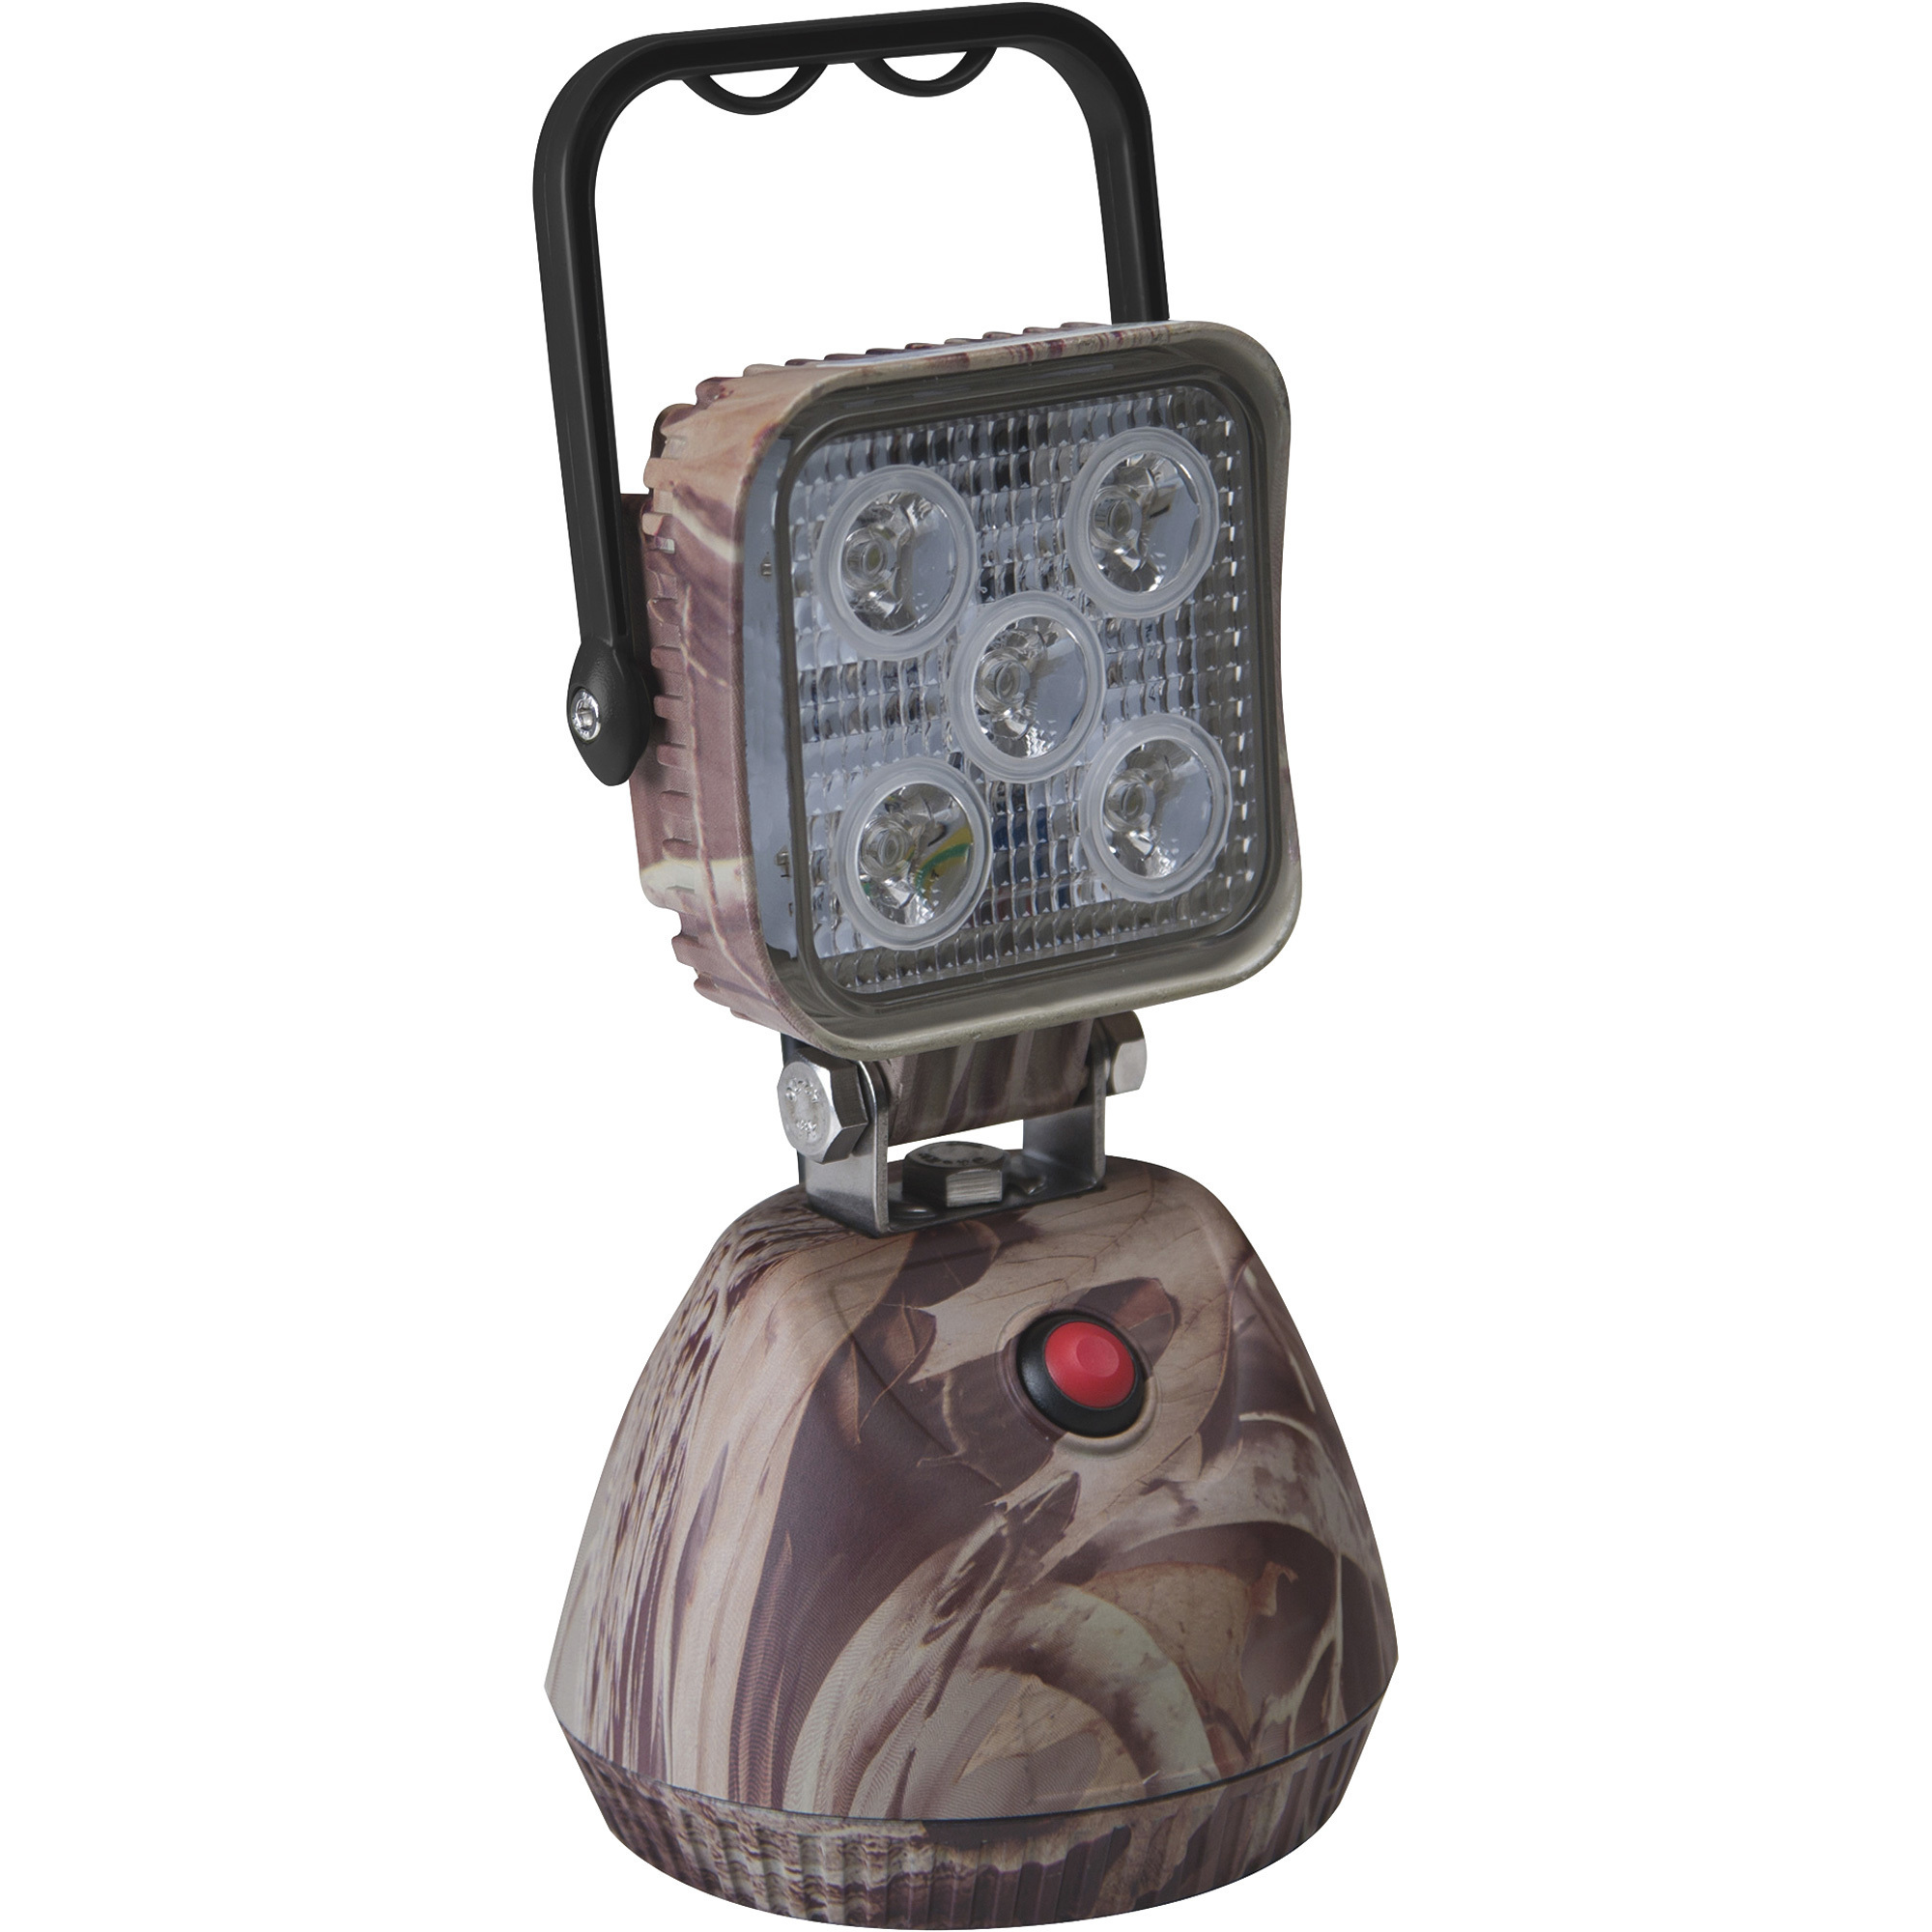 ECCO LED Rechargeable Work Light â 12V, 650 Lumens, 5 LEDs, Camouflage Pattern, Model EW2461-CAMO